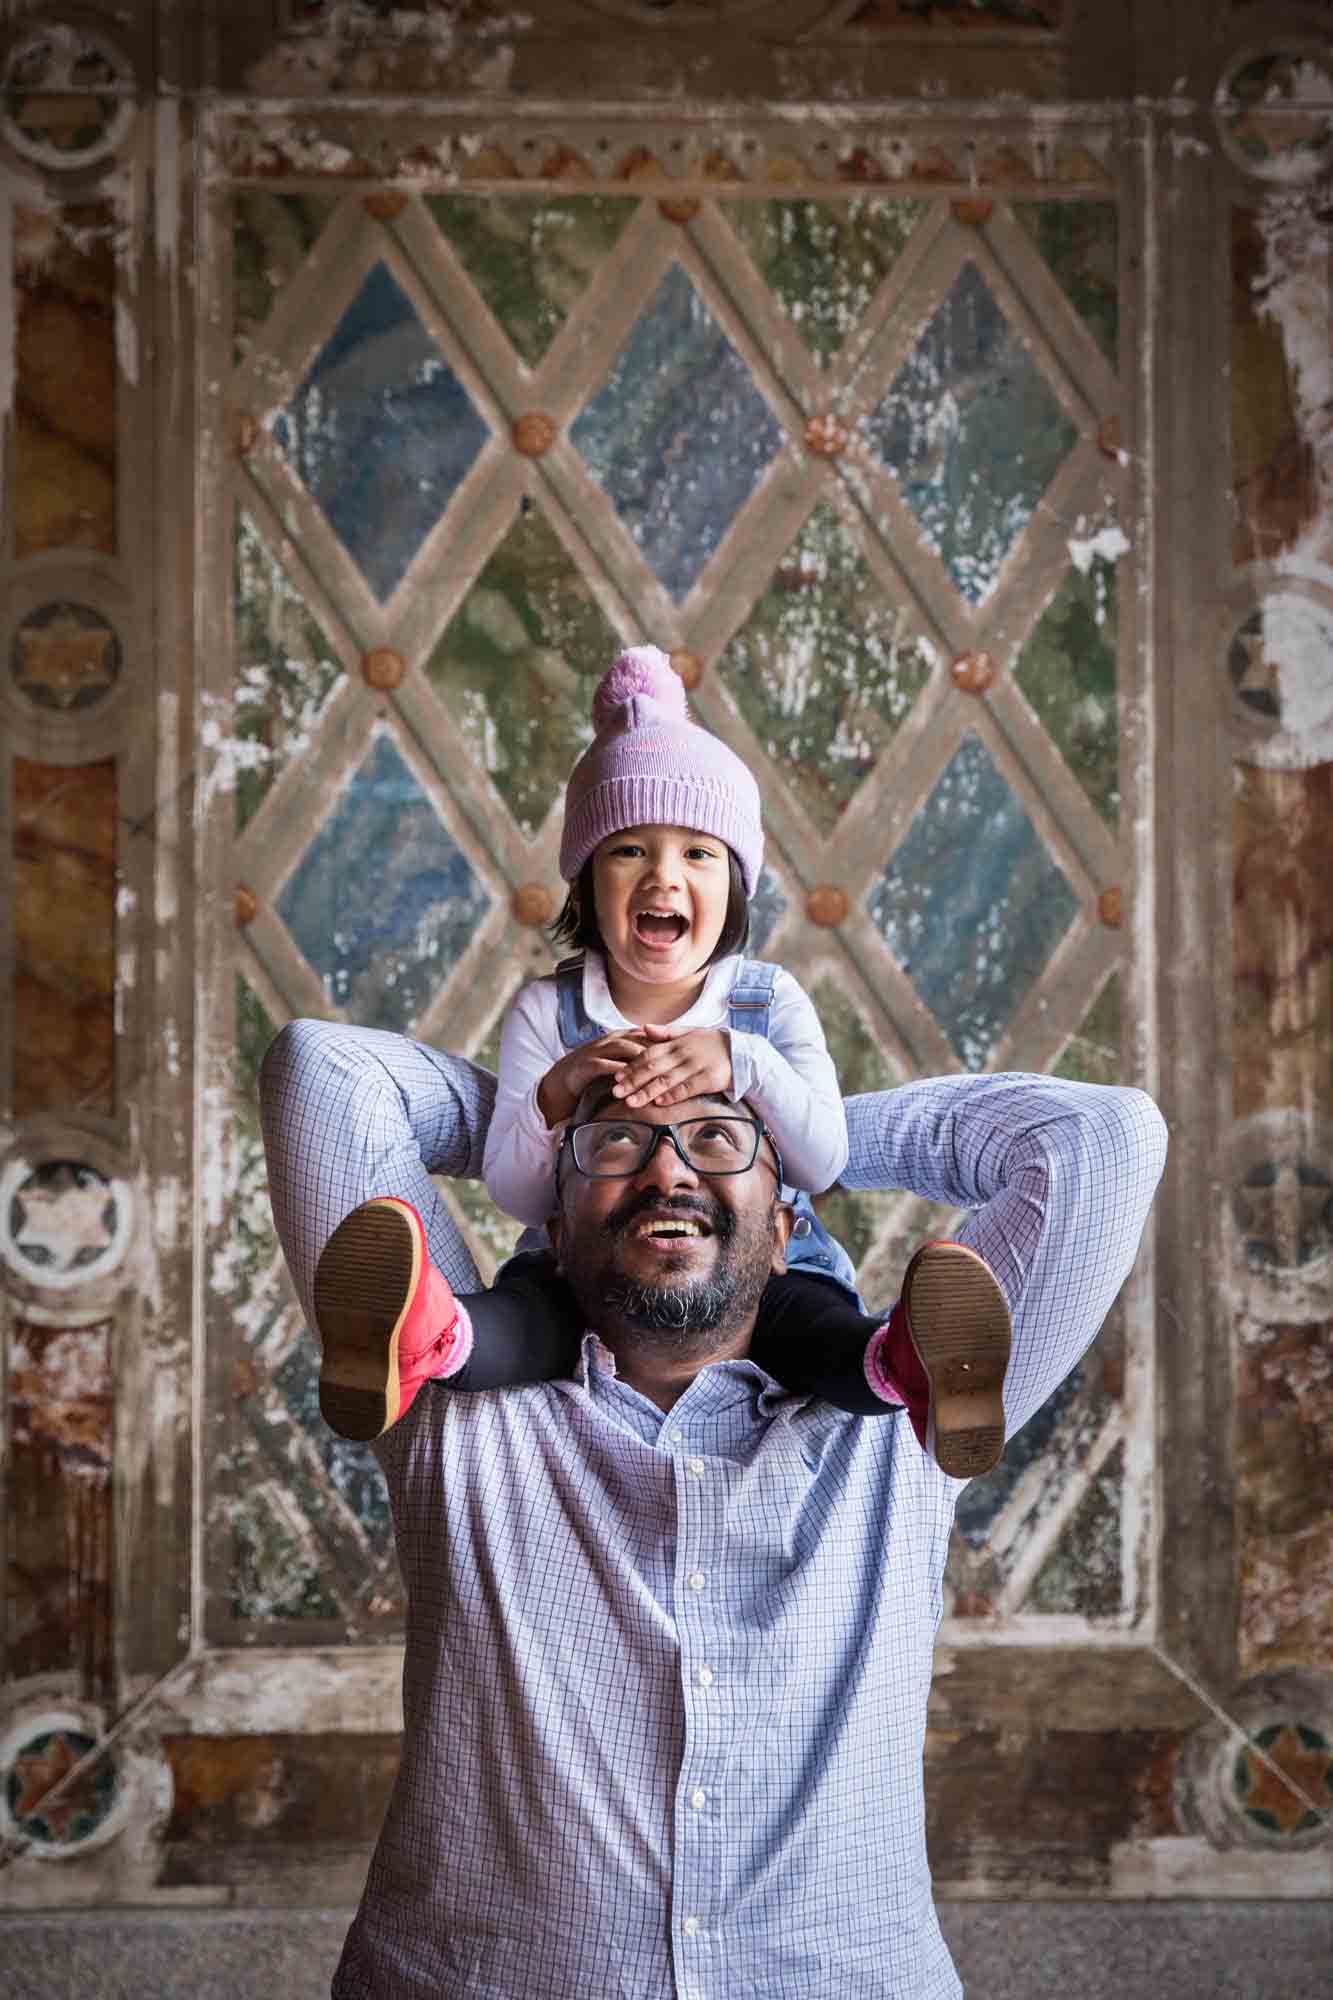 Little girl wearing knit cap and sitting on father's shoulders during a Central Park family portrait